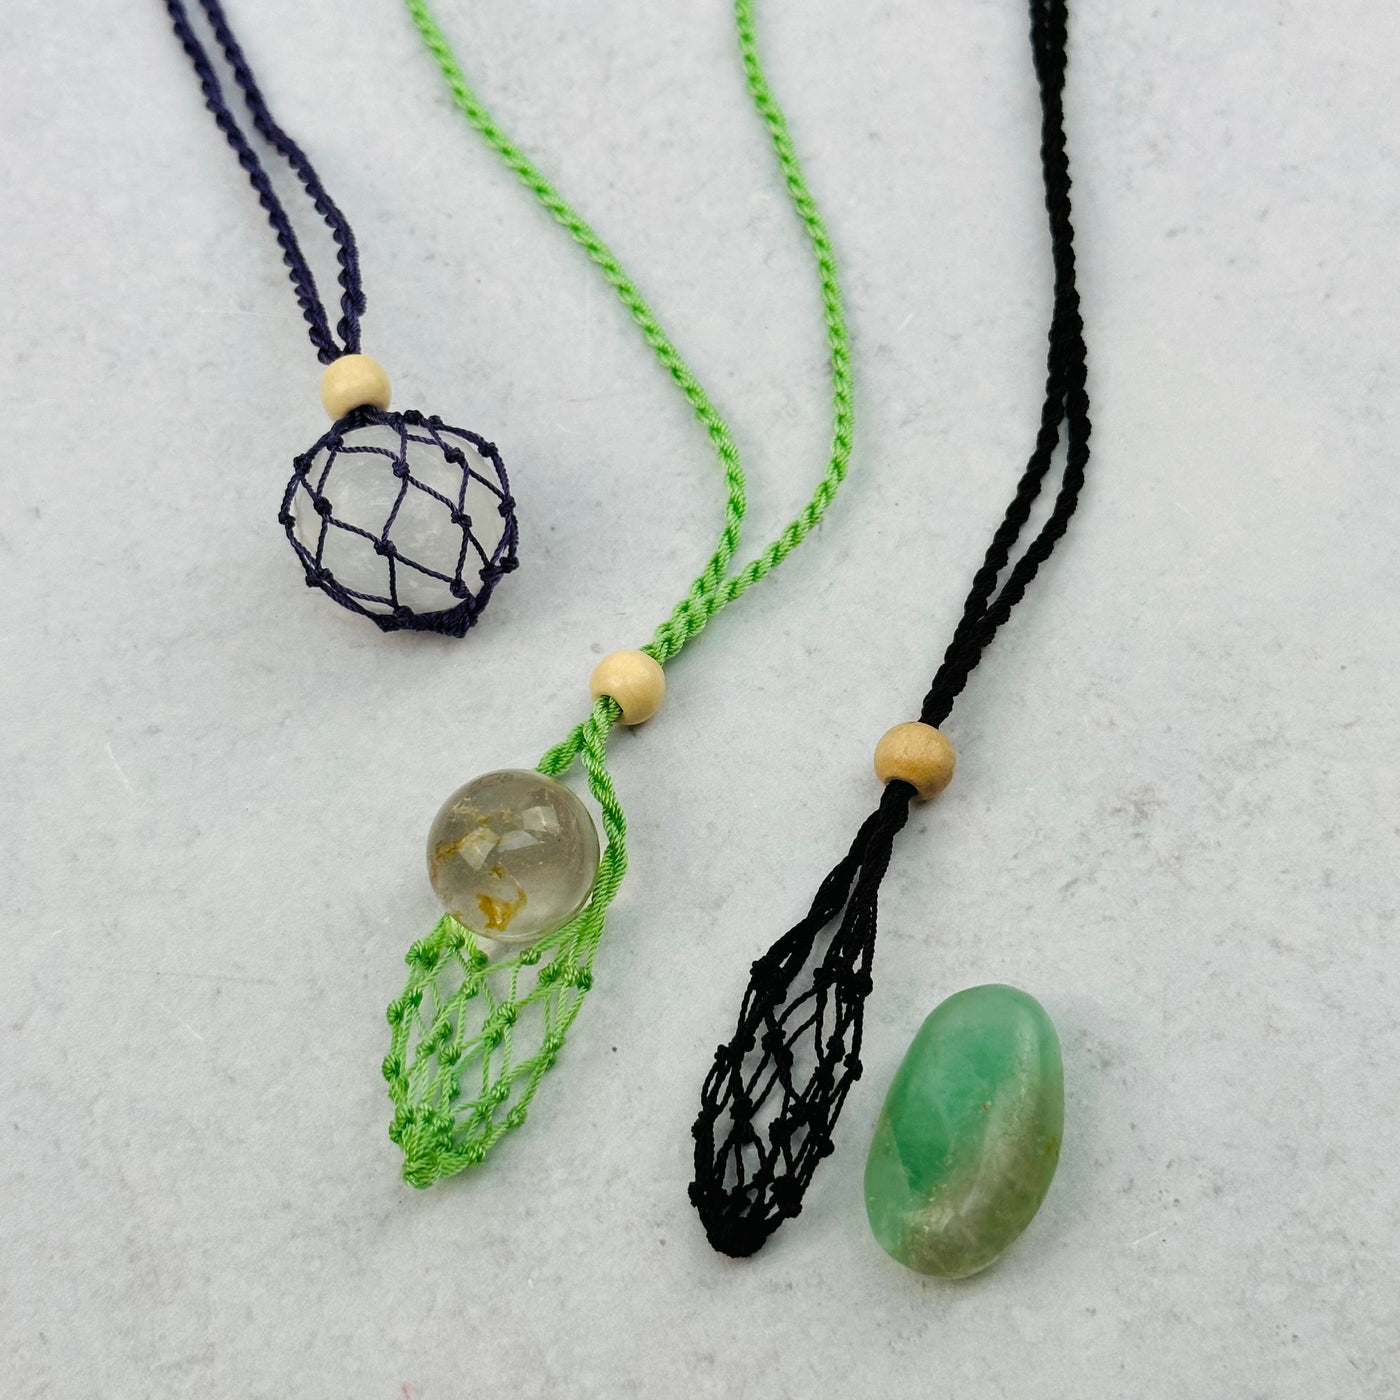 necklaces displayed with some small crystals that can fit in the net